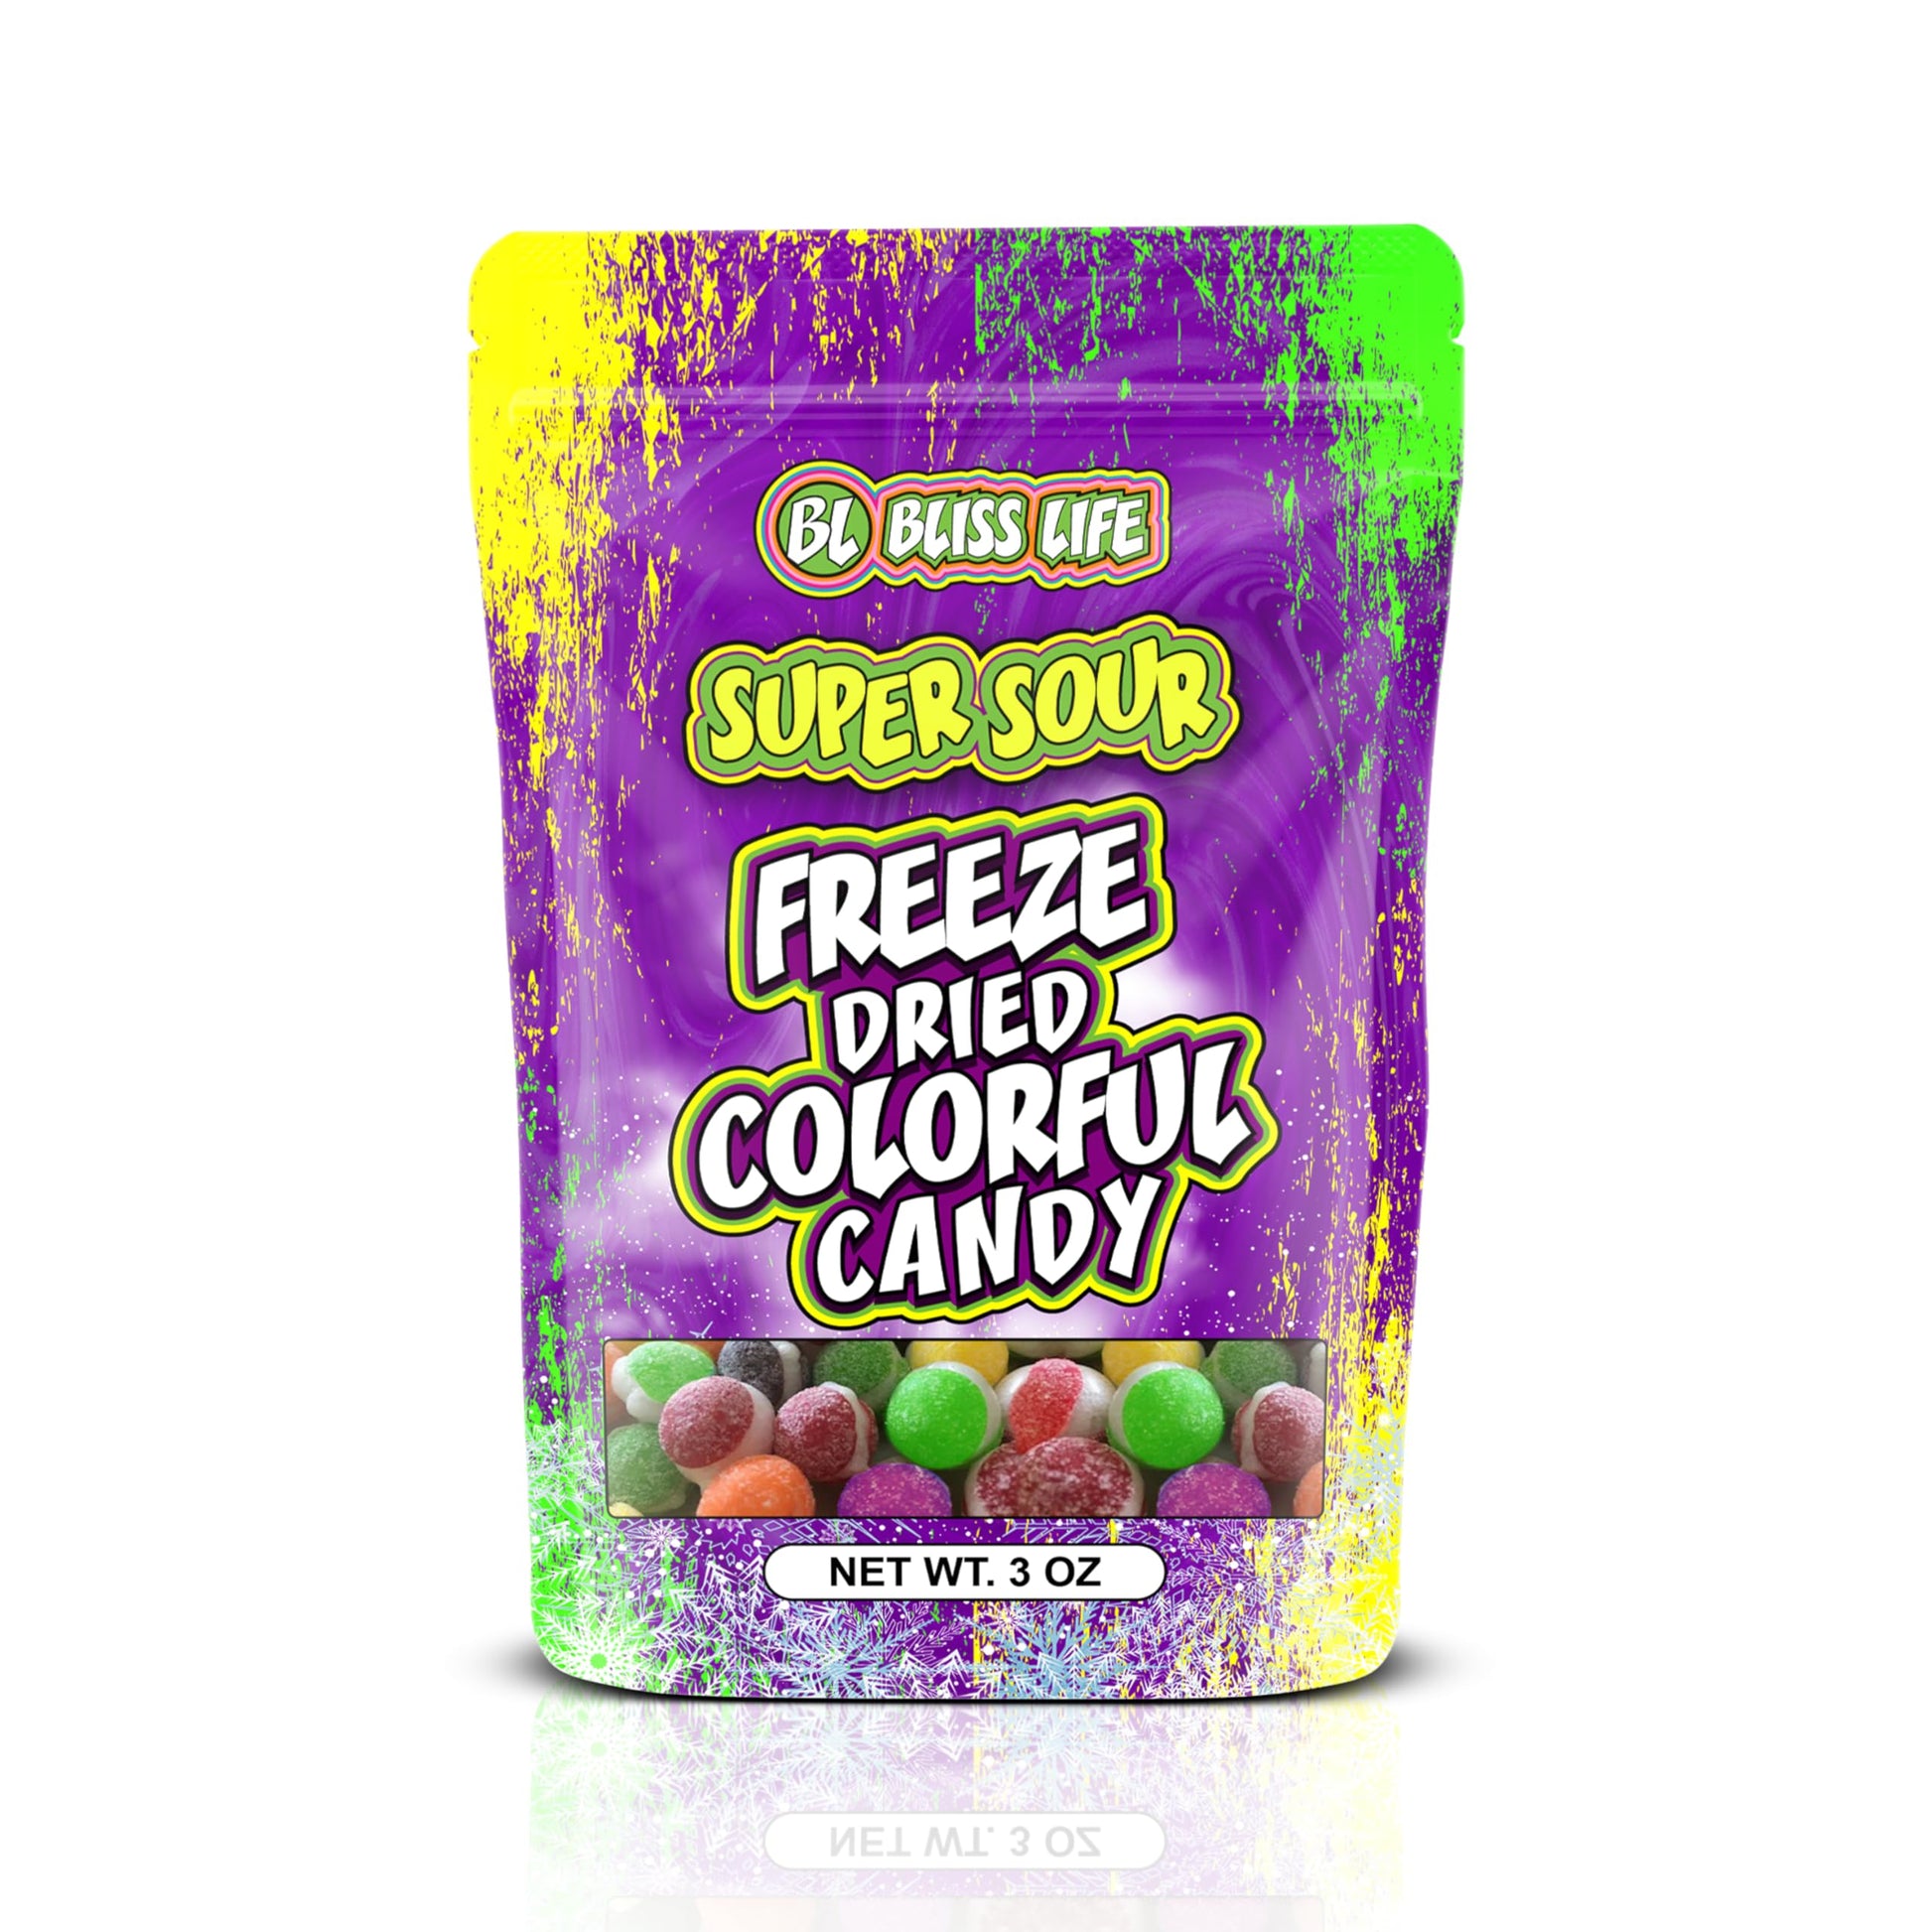 Super sour freeze dried colorful candy